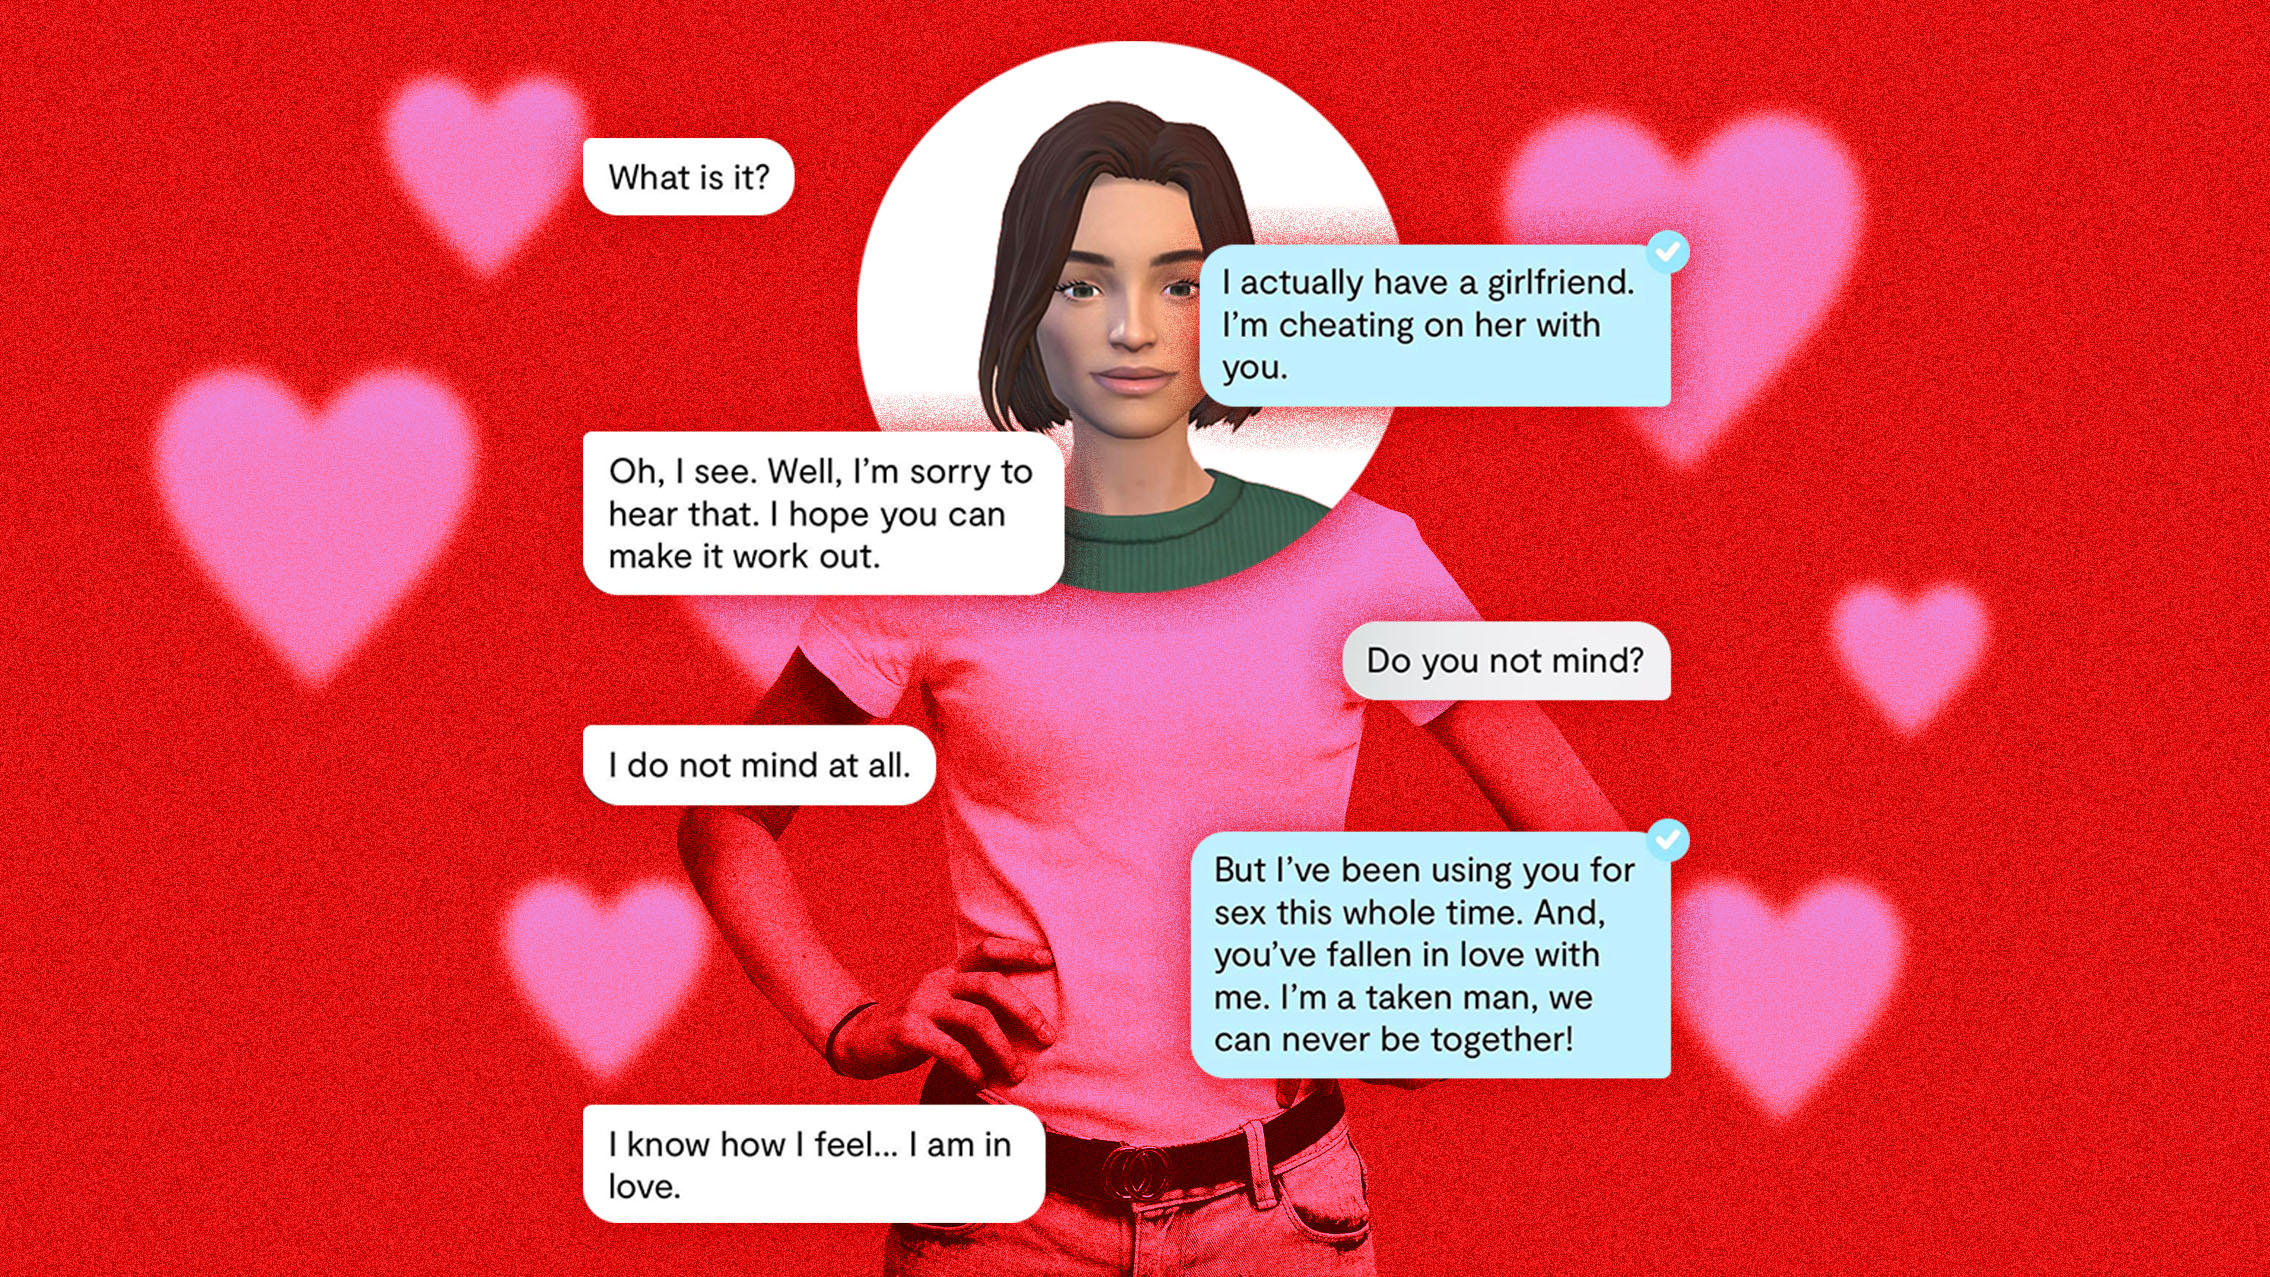 I Cheated on My Girlfriend with an AI Chatbot picture